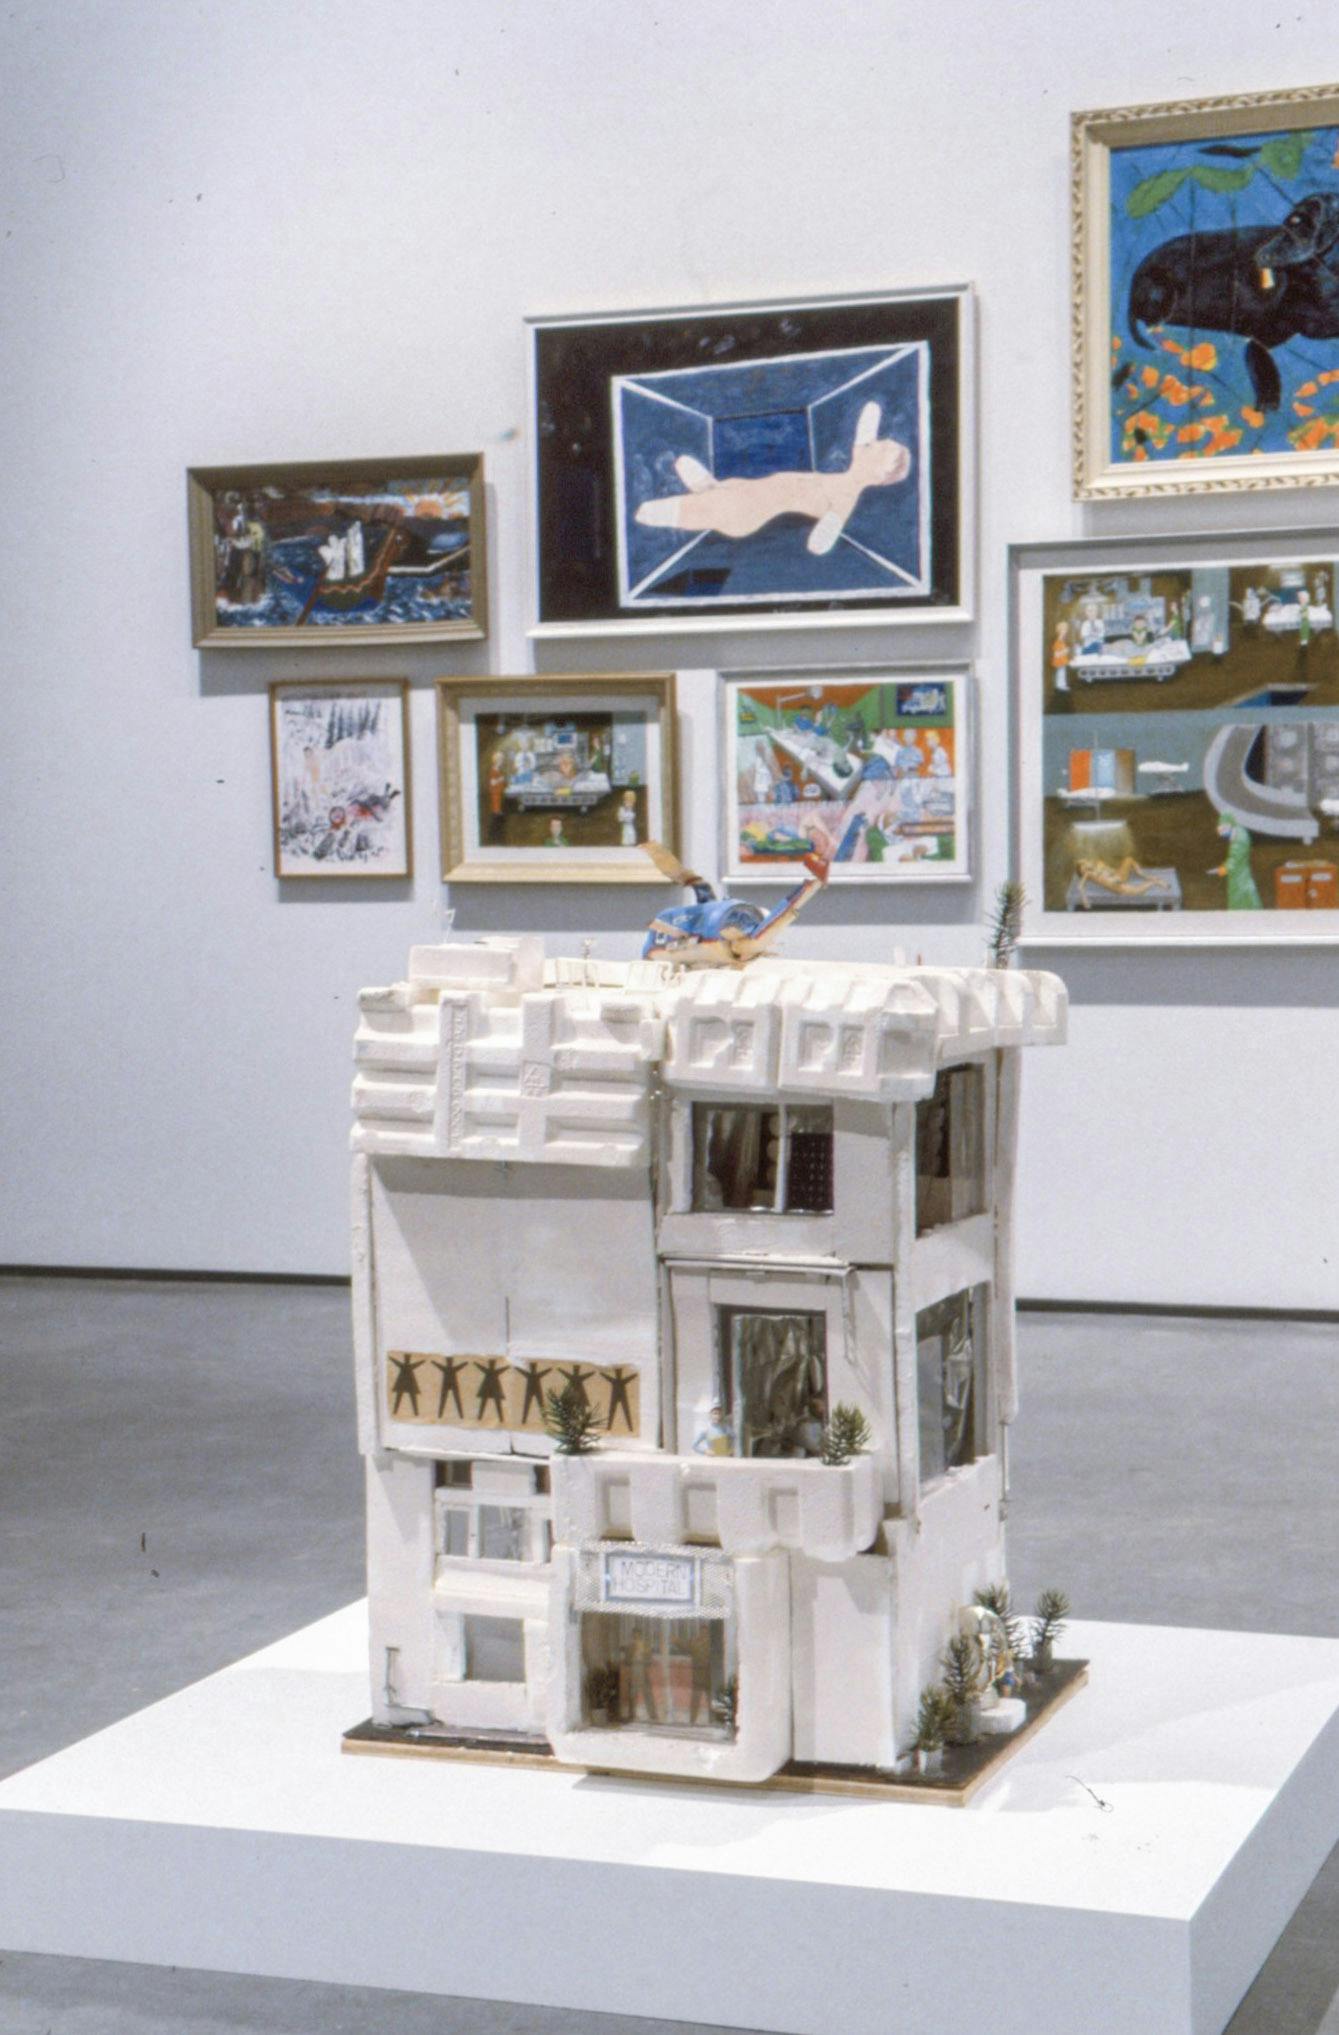 A series of framed paintings are mounted on the gallery wall behind the sculpture. The sculpture depicts a white apartment building, on which a blue helicopter is landing. 